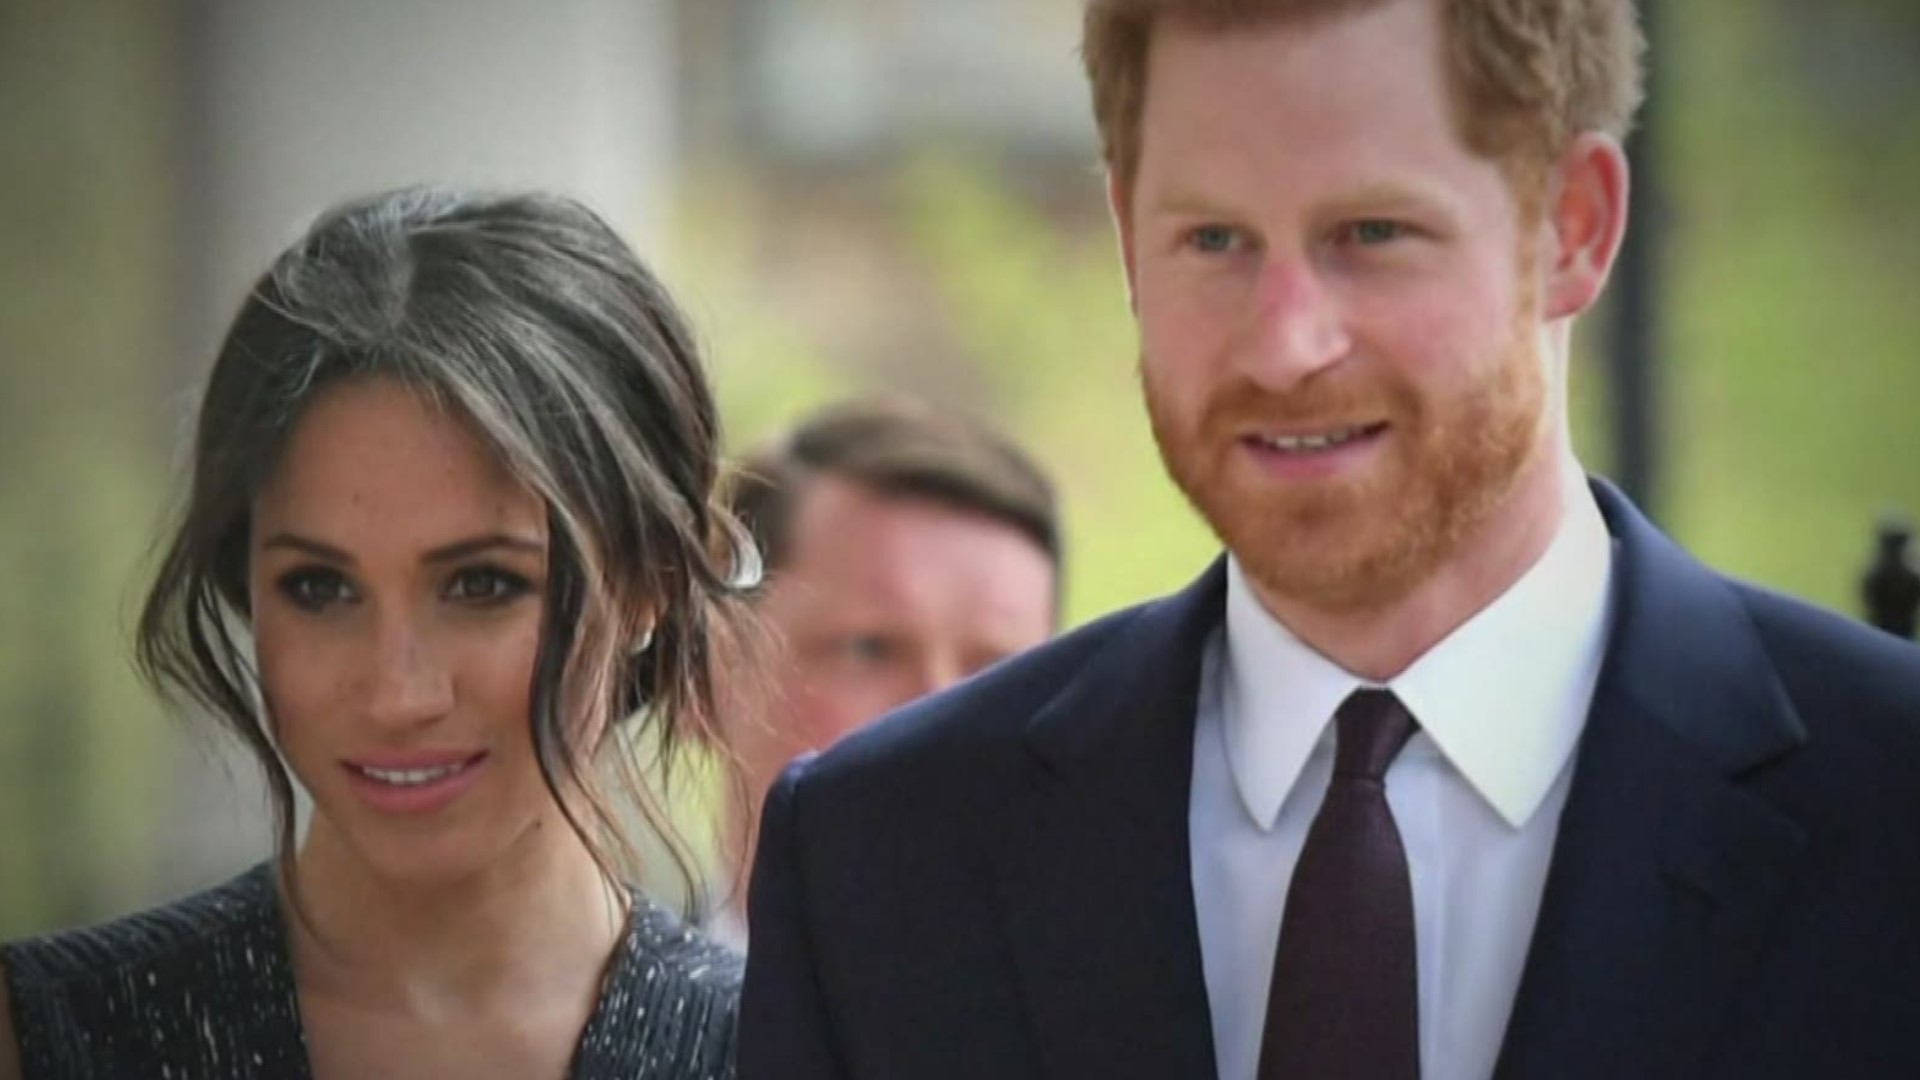 Prince Harry and Meghan, together with Meghan’s mother, were followed for more than two hours by six vehicles after leaving a charity event, their office said.